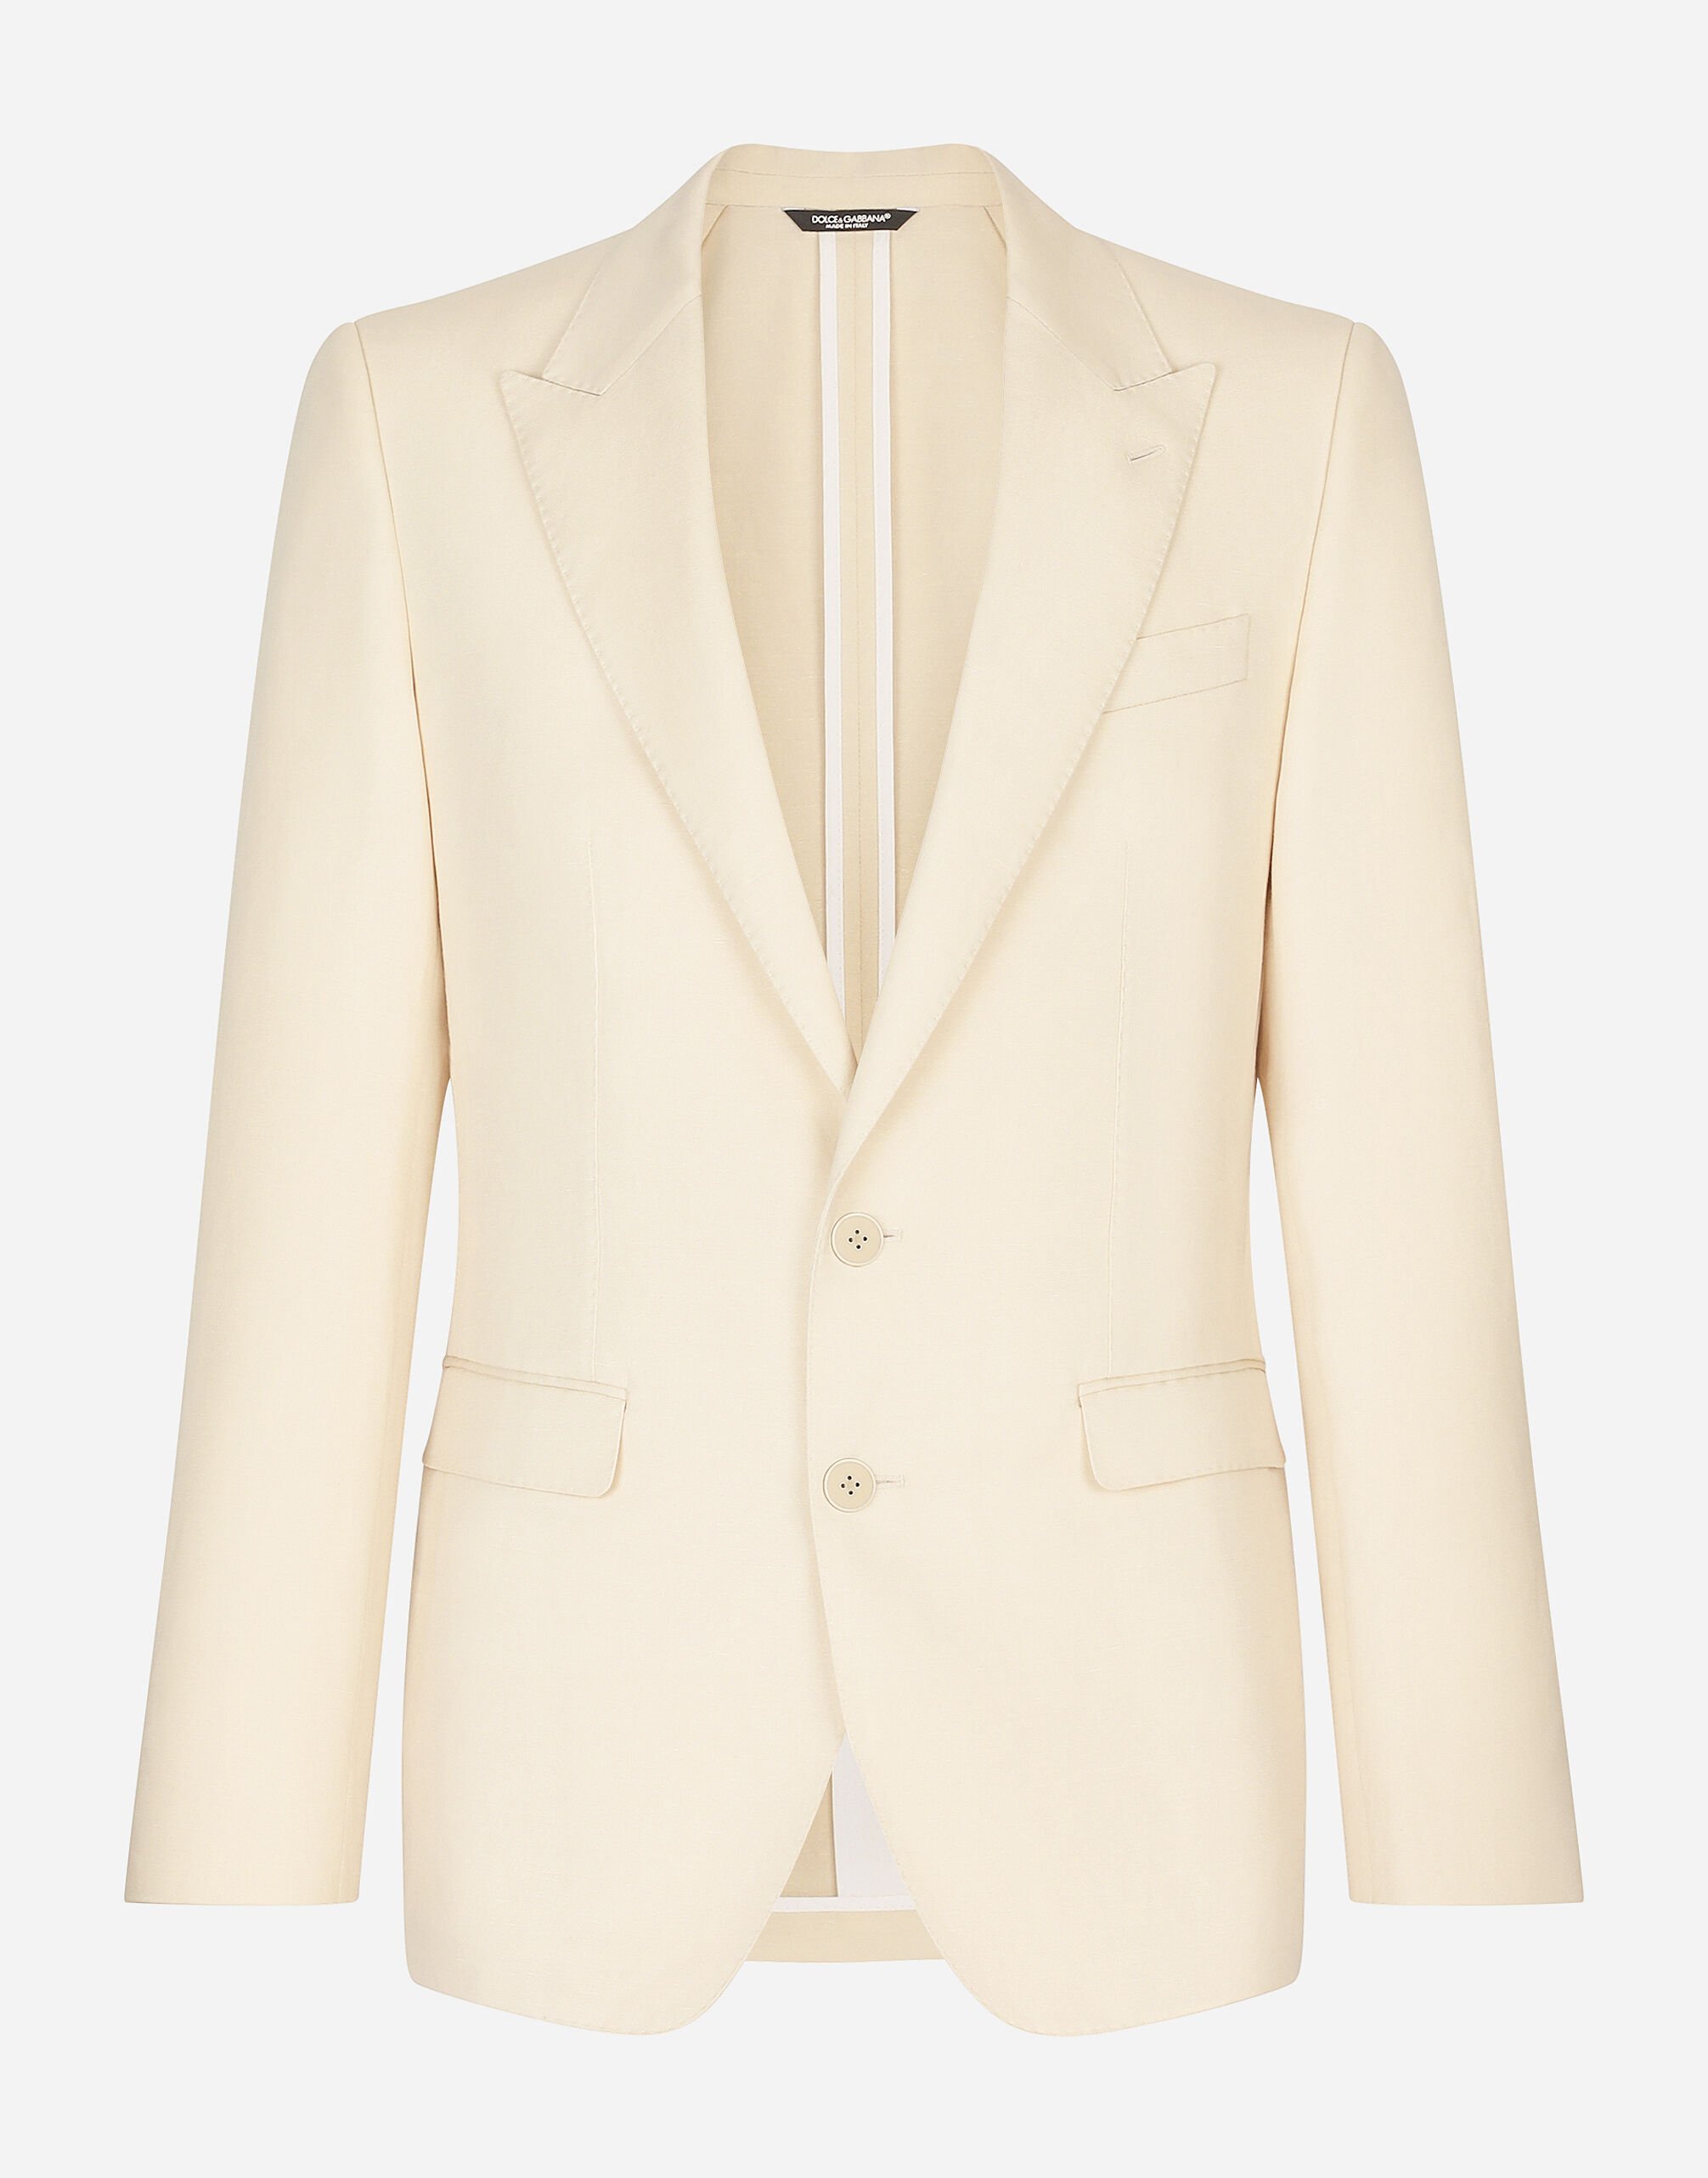 Dolce & Gabbana Single-breasted Taormina jacket in linen, cotton and silk White G2NW0TFUMJN